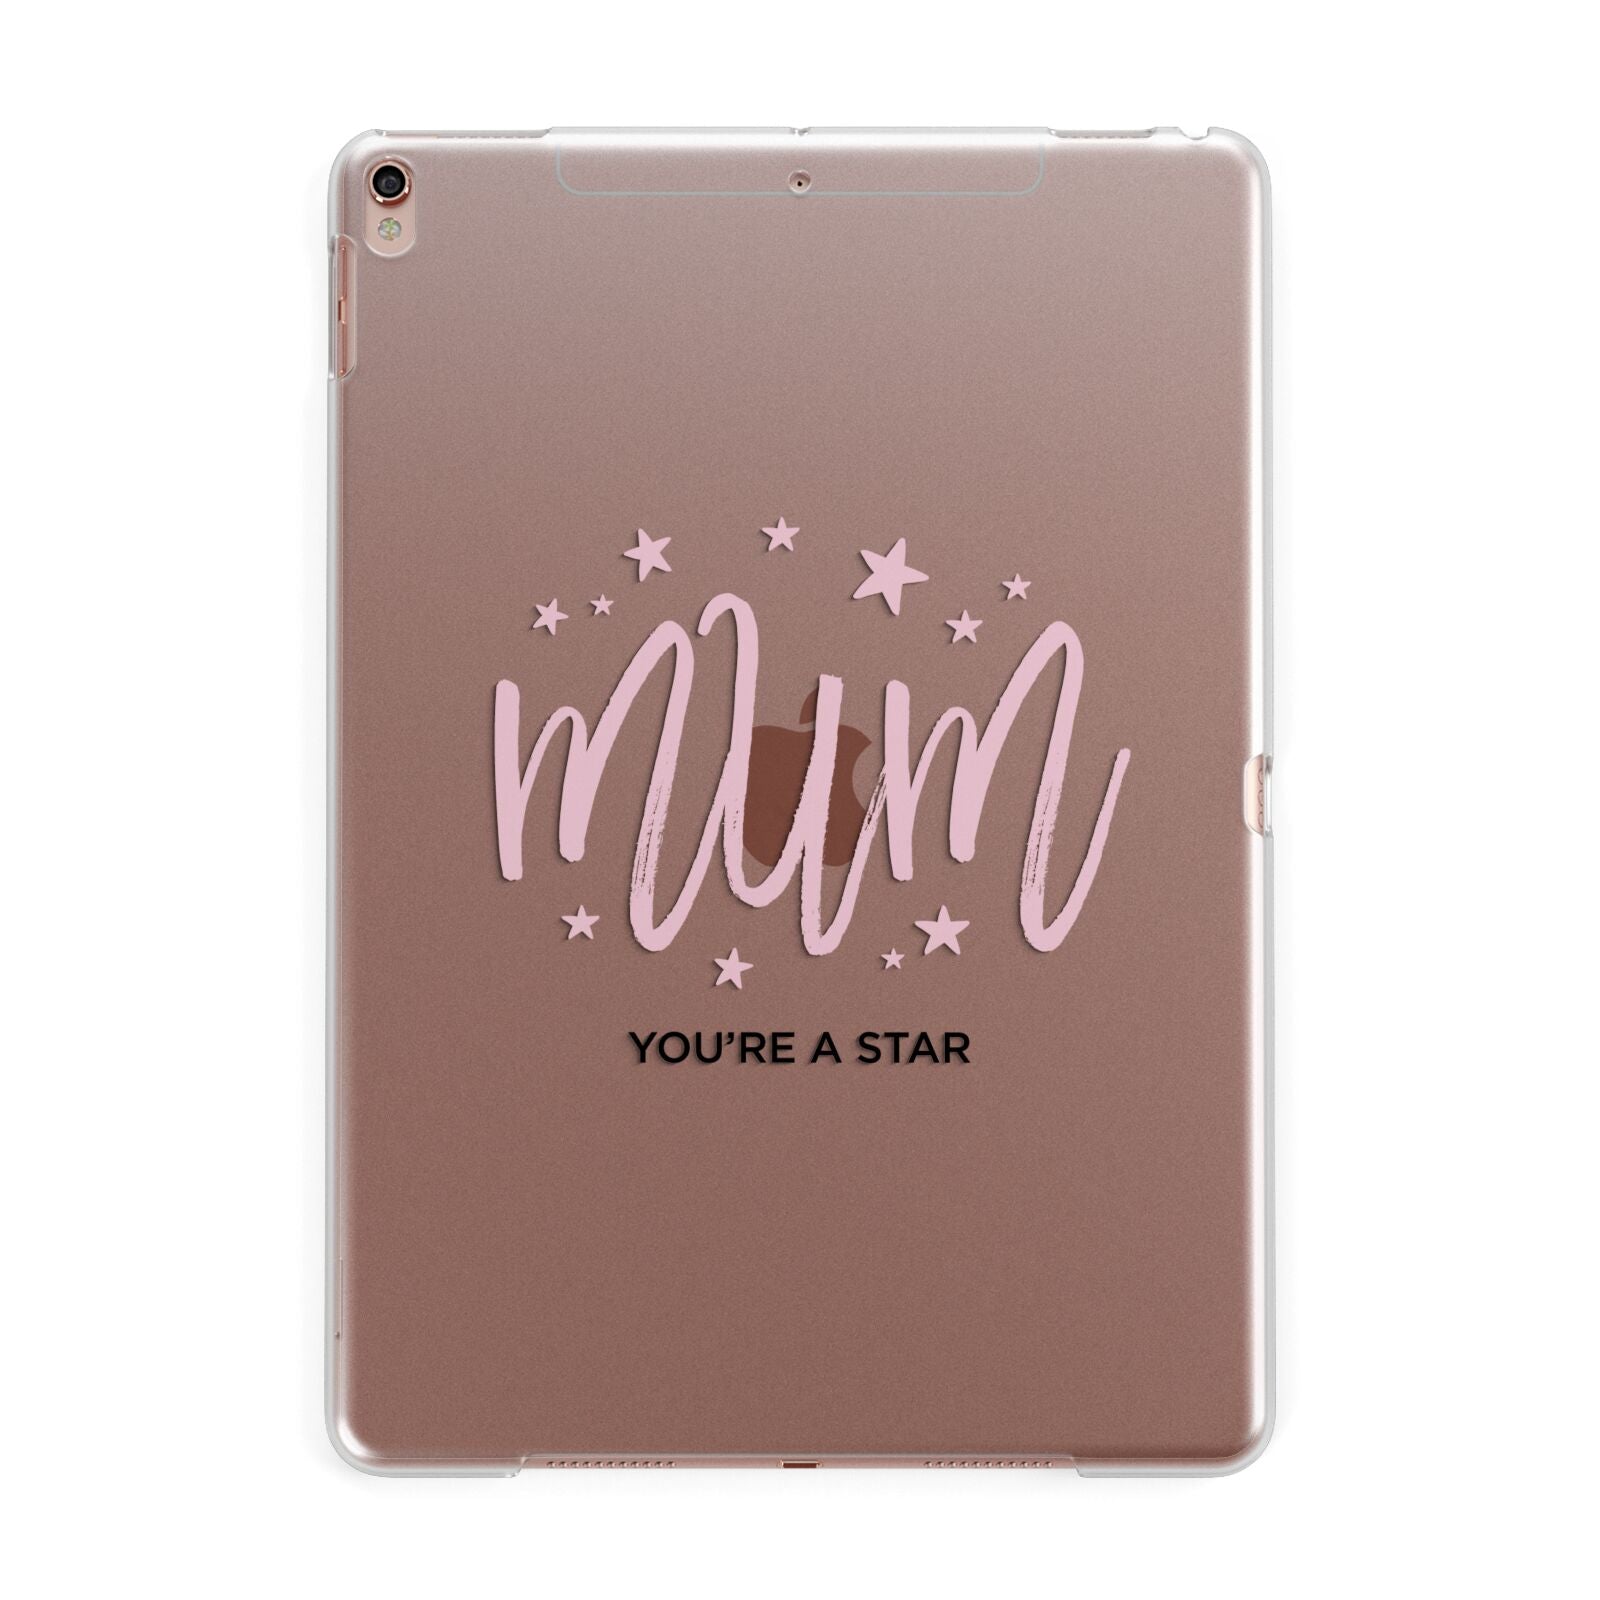 Mum Youre a Star Apple iPad Rose Gold Case